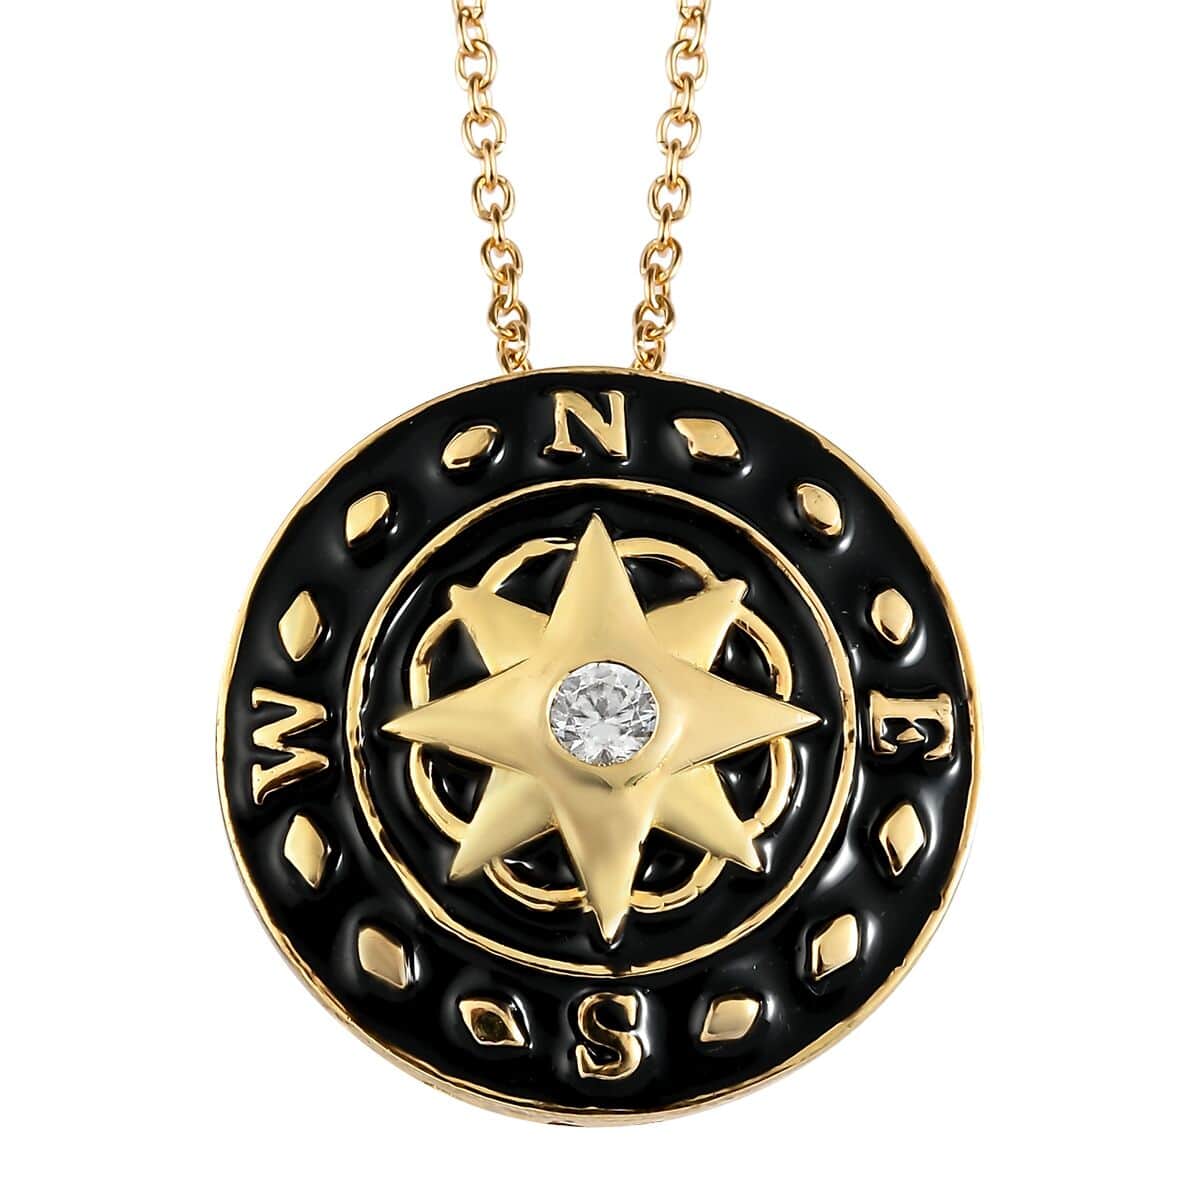 Karis White Zircon, Enameled Compass Style Pendant Necklace (20 Inches) in 18K YG Plated and ION Plated YG Stainless Steel 0.25 ctw , Tarnish-Free, Waterproof, Sweat Proof Jewelry image number 0